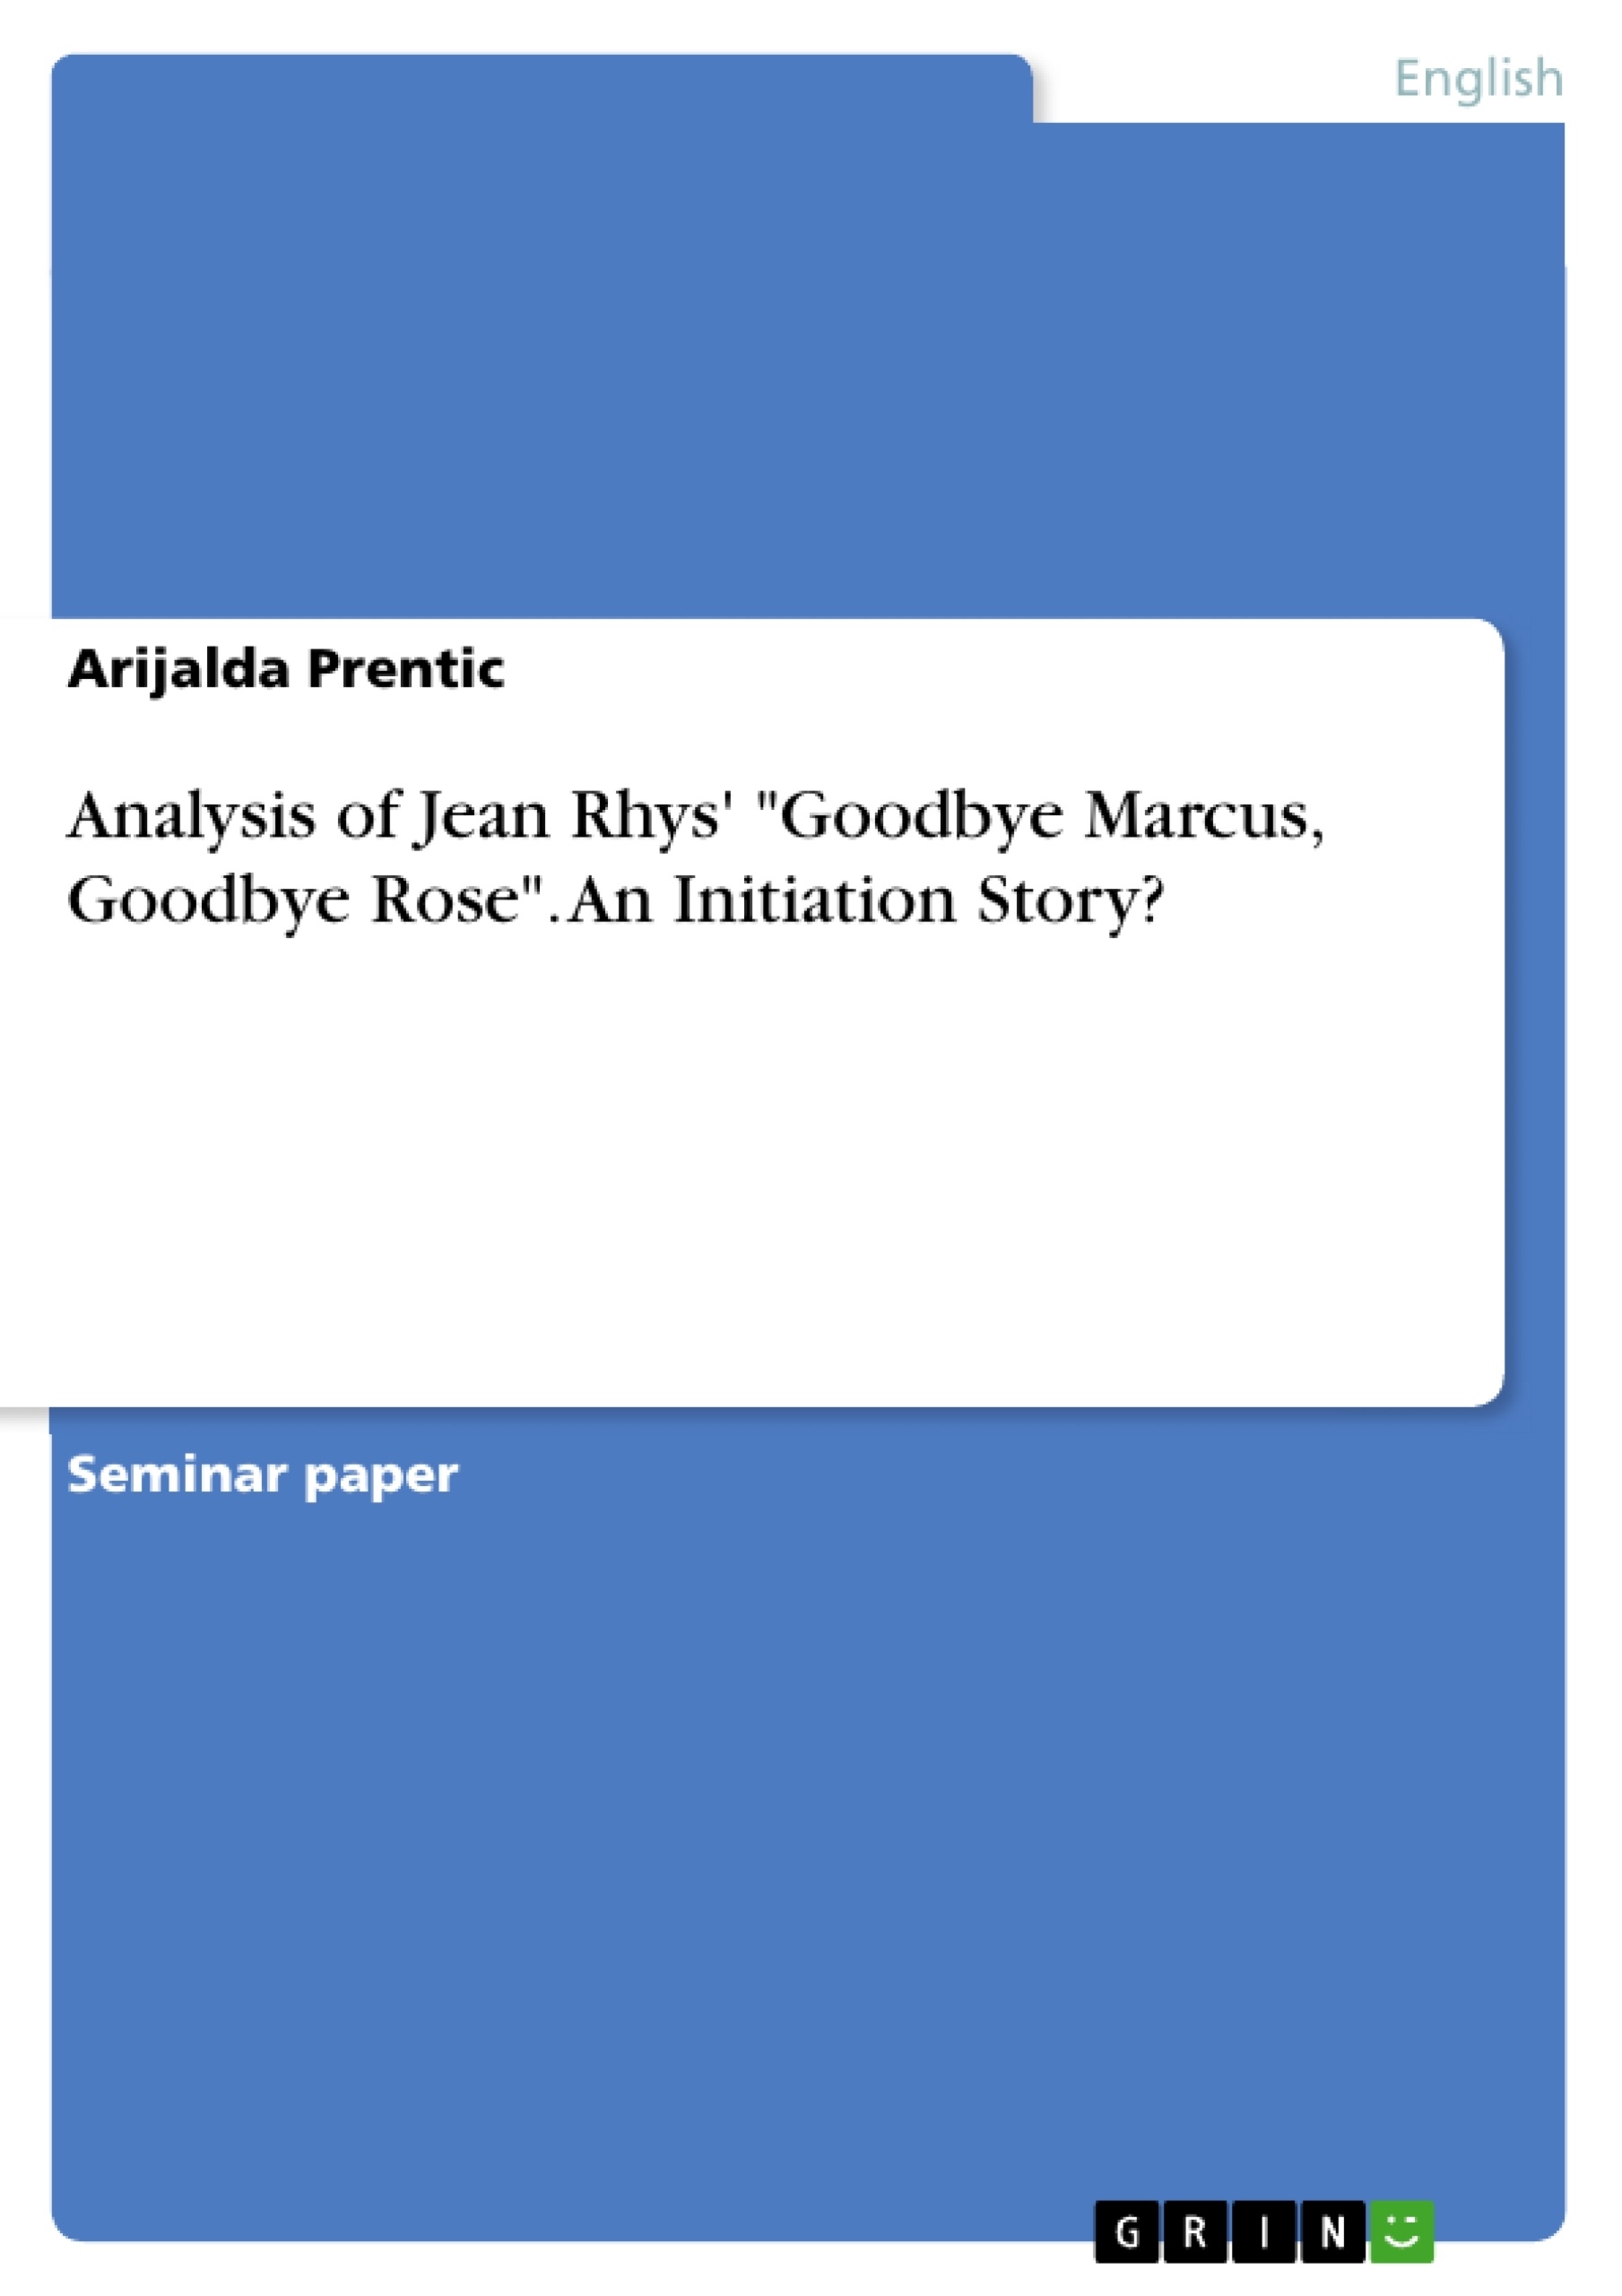 Title: Analysis of Jean Rhys' "Goodbye Marcus, Goodbye Rose". An Initiation Story?